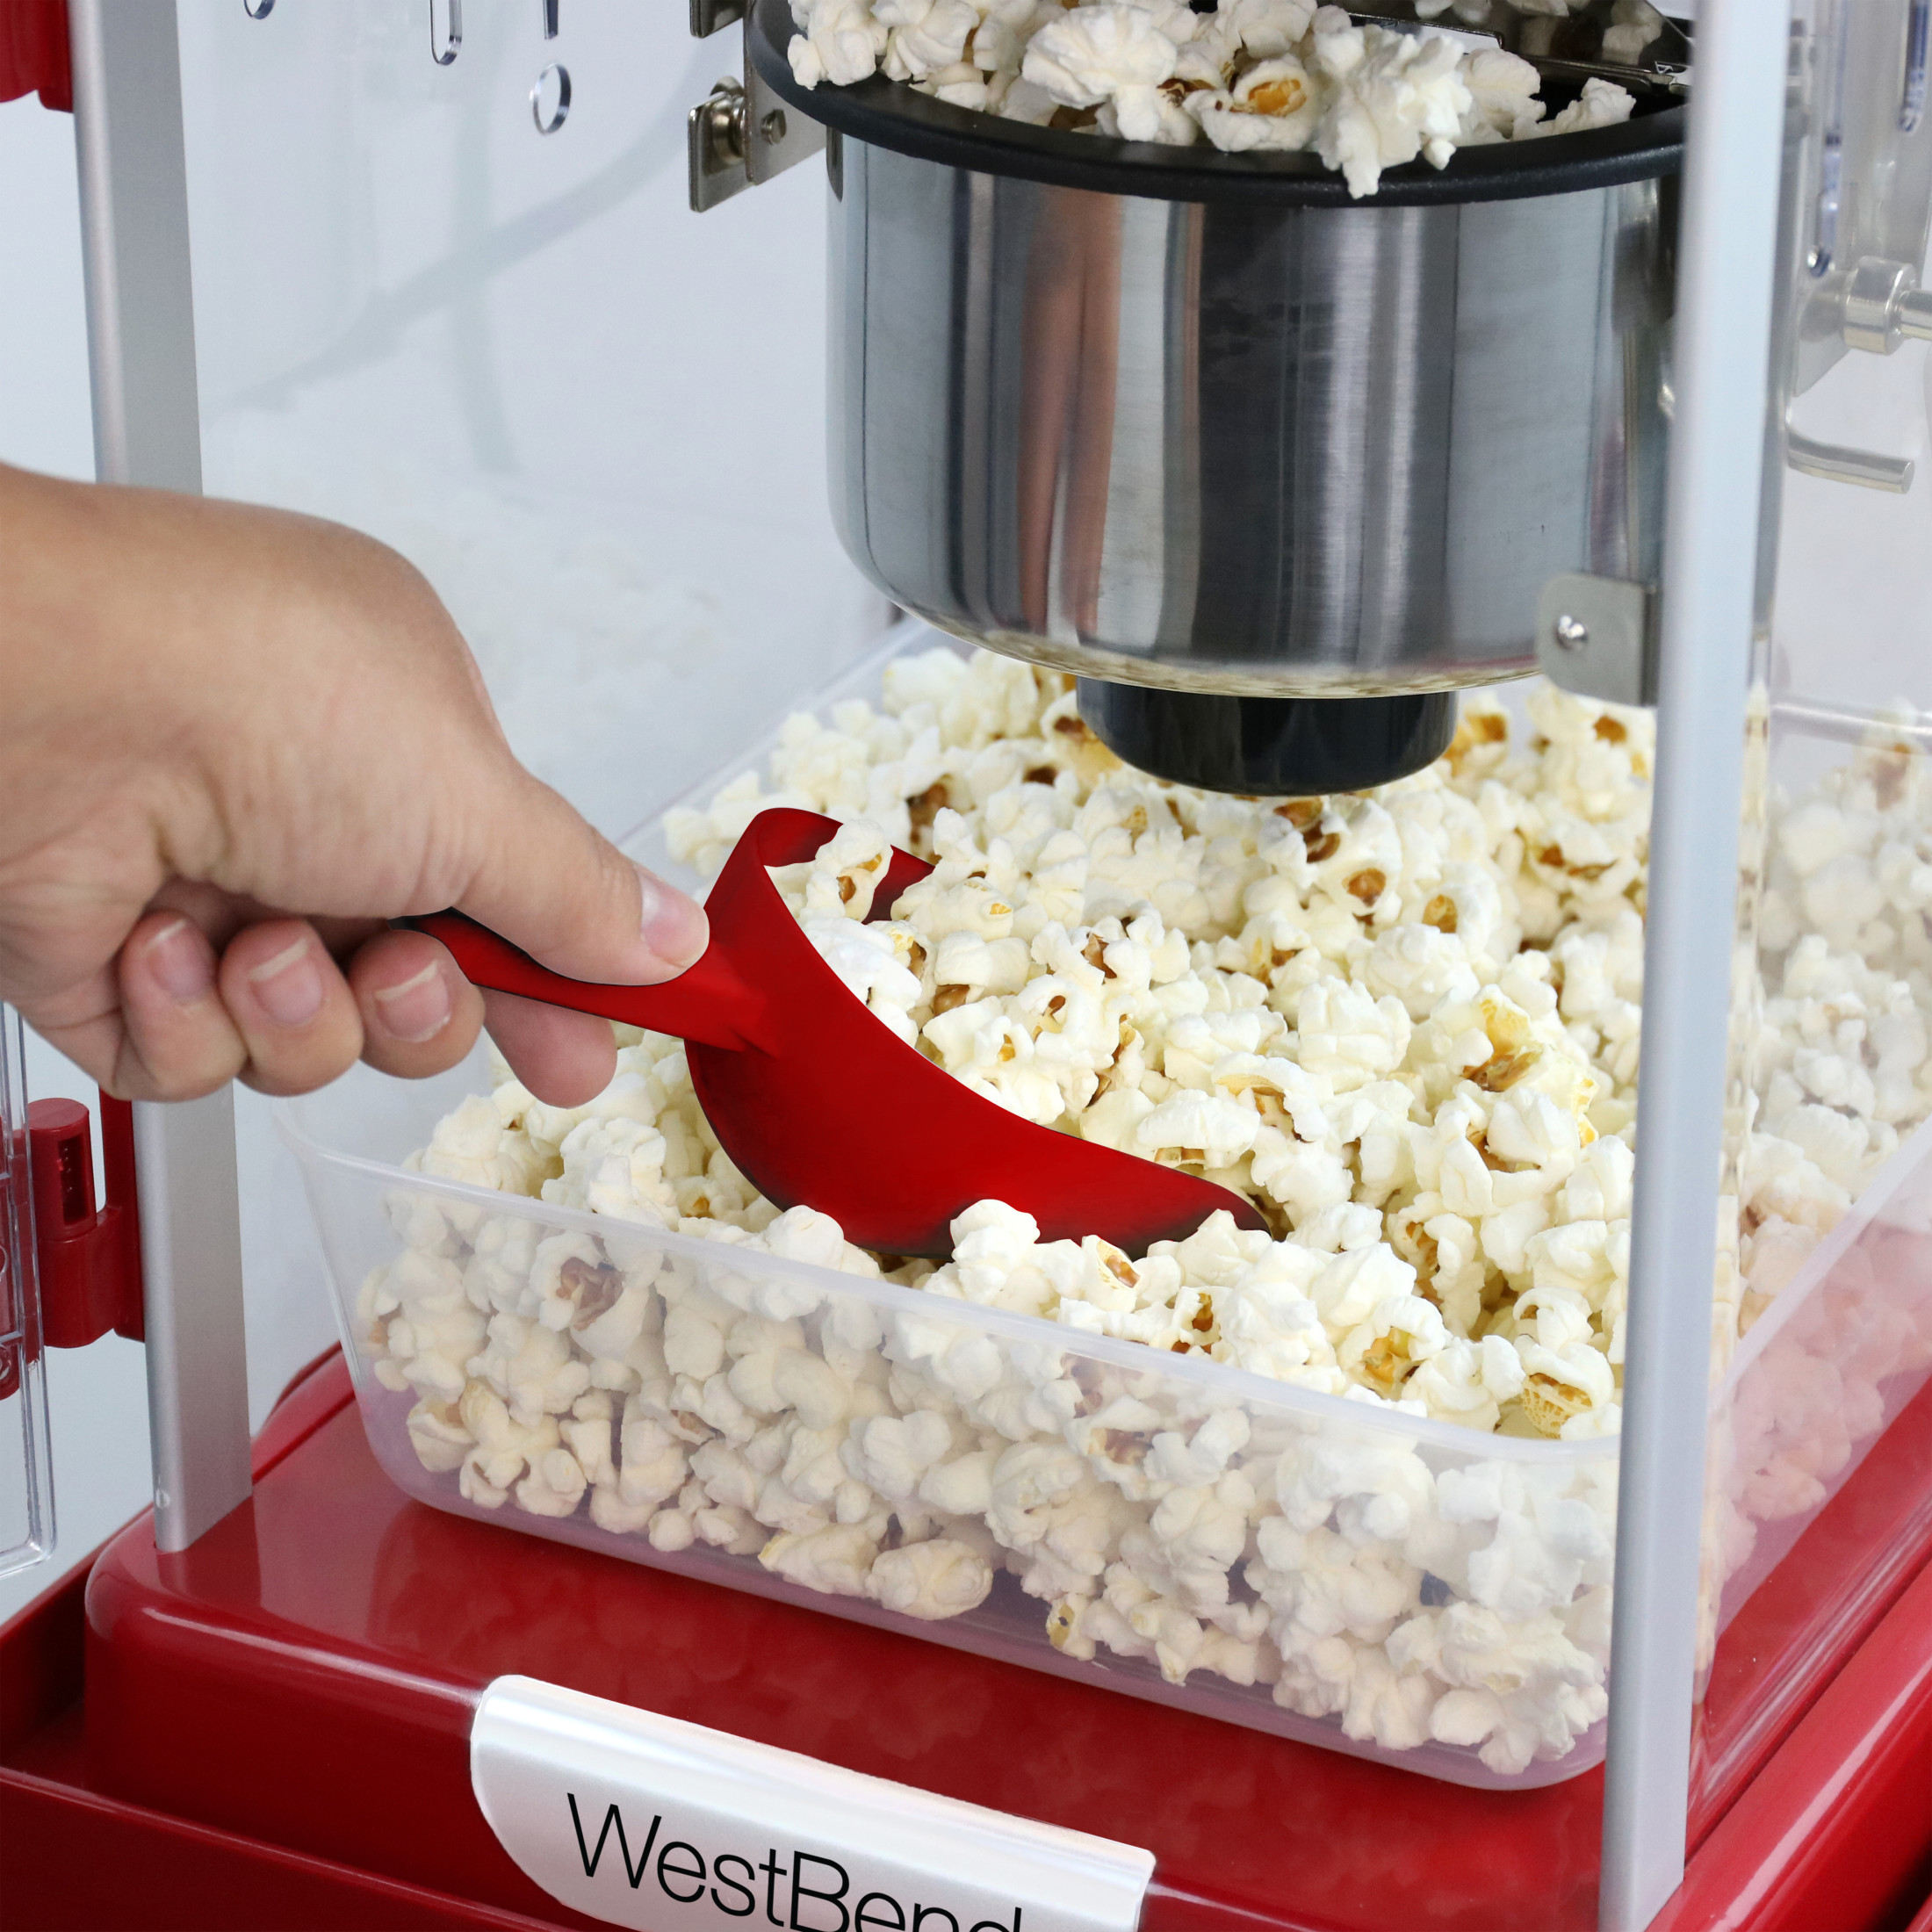 West Bend Popcorn Machine and Cart, 10-Cup Capacity, in Red (PCMC20RD13), 14.35 lb., New - image 2 of 6